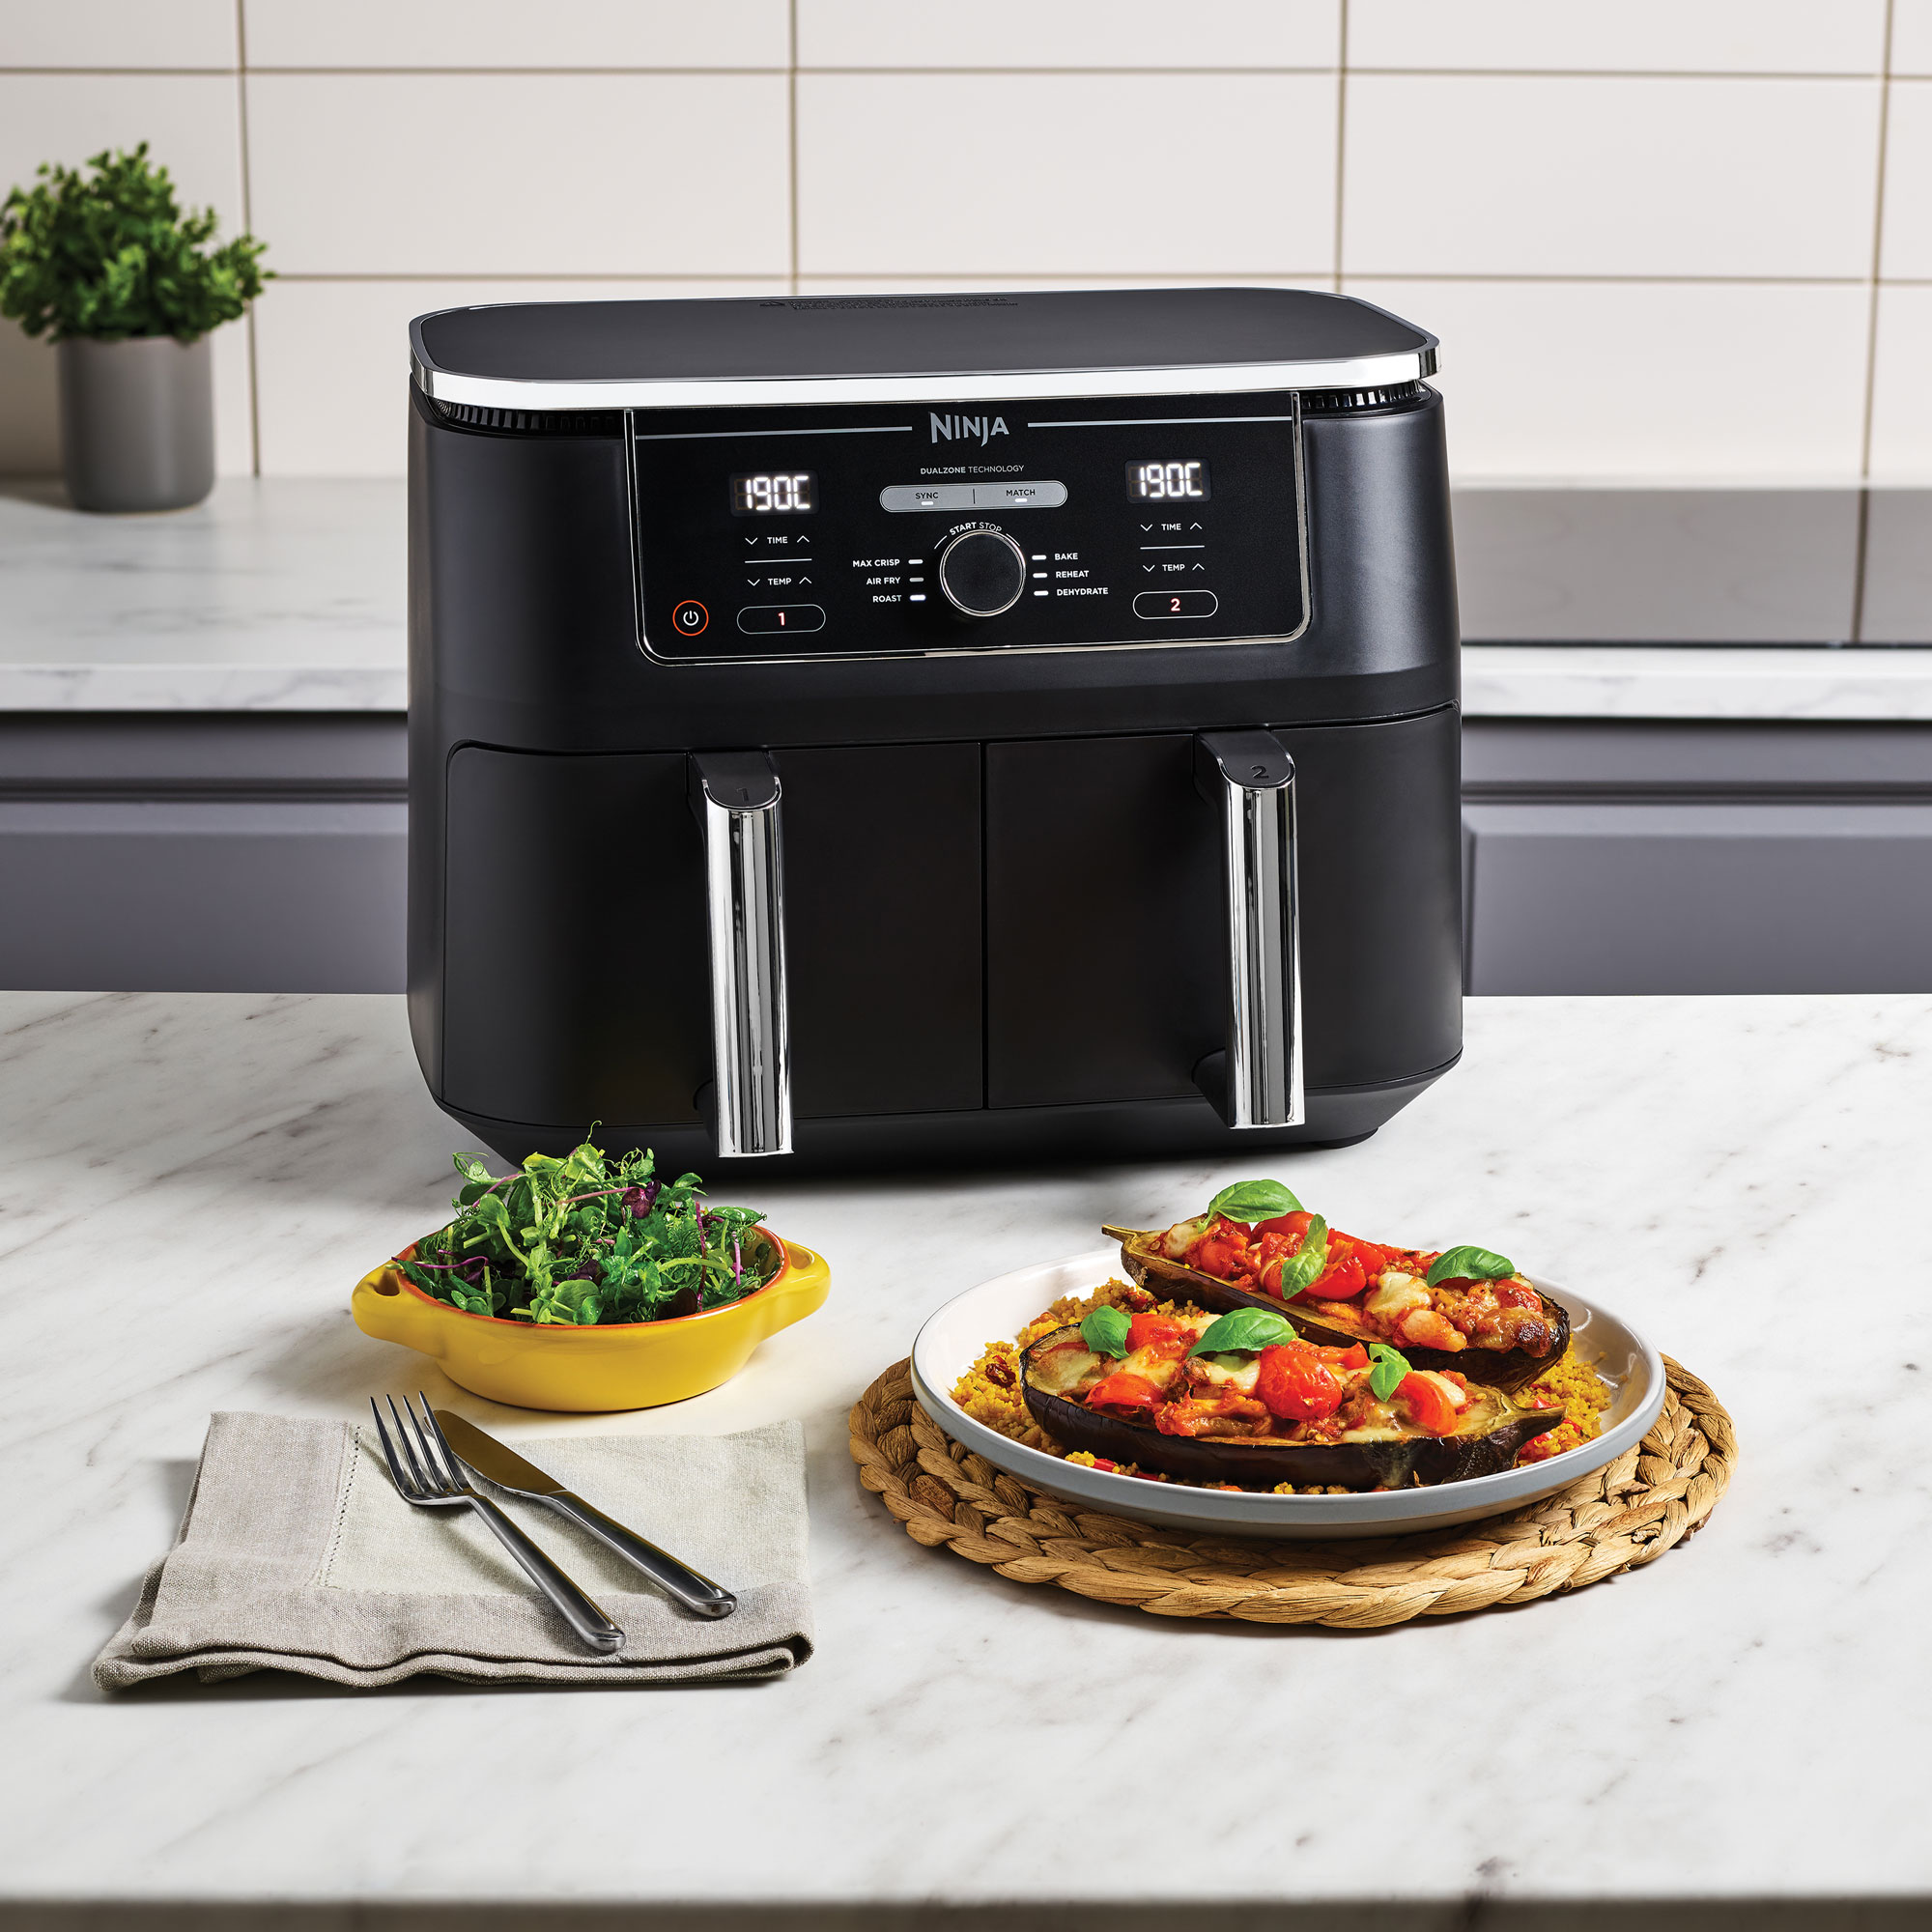 Cult-favorite Ninja air fryer models are marked down right now at